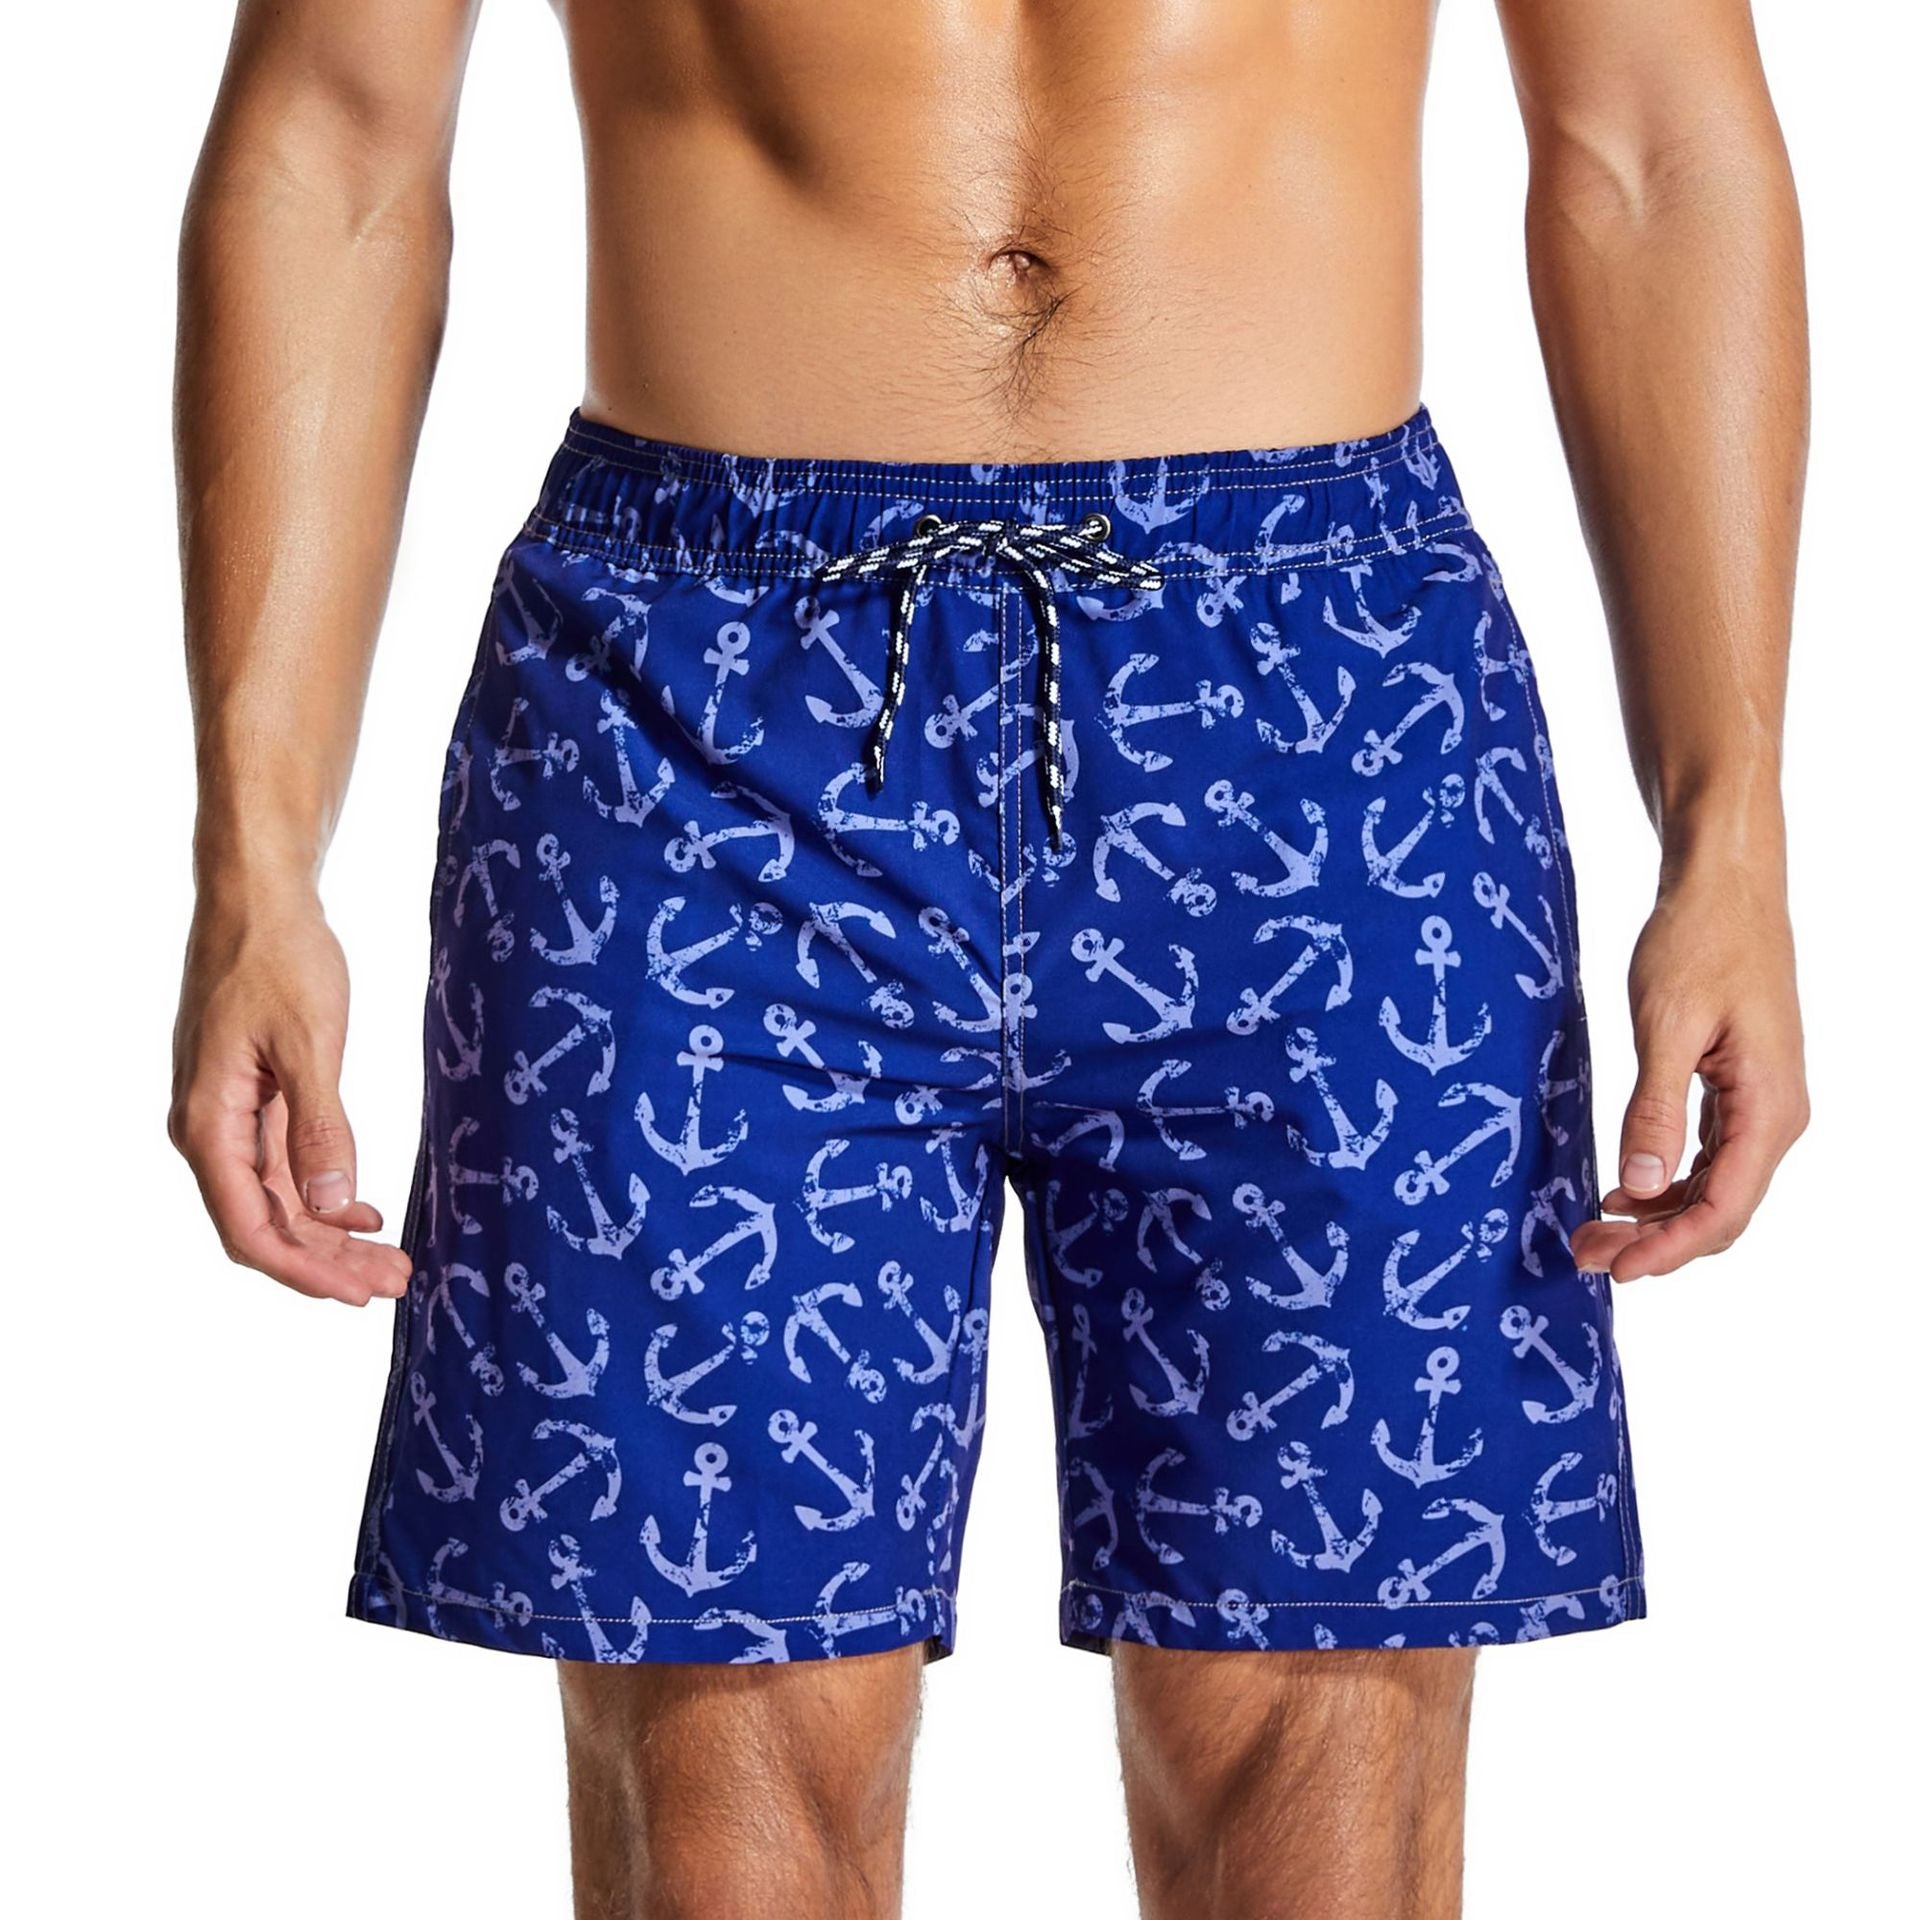 Men's Swim Trunks with Compression Liner Quick Dry 7" Inseam Swimsuit Swimwear - Anchors